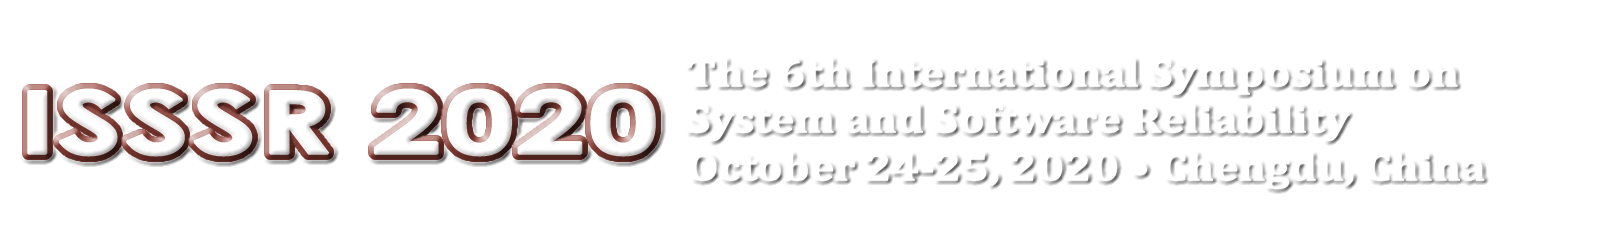 ISSSR 2020 October 24-25, 2020 in Chengdu, China. The 6th International Symposium on System and Software Reliability.